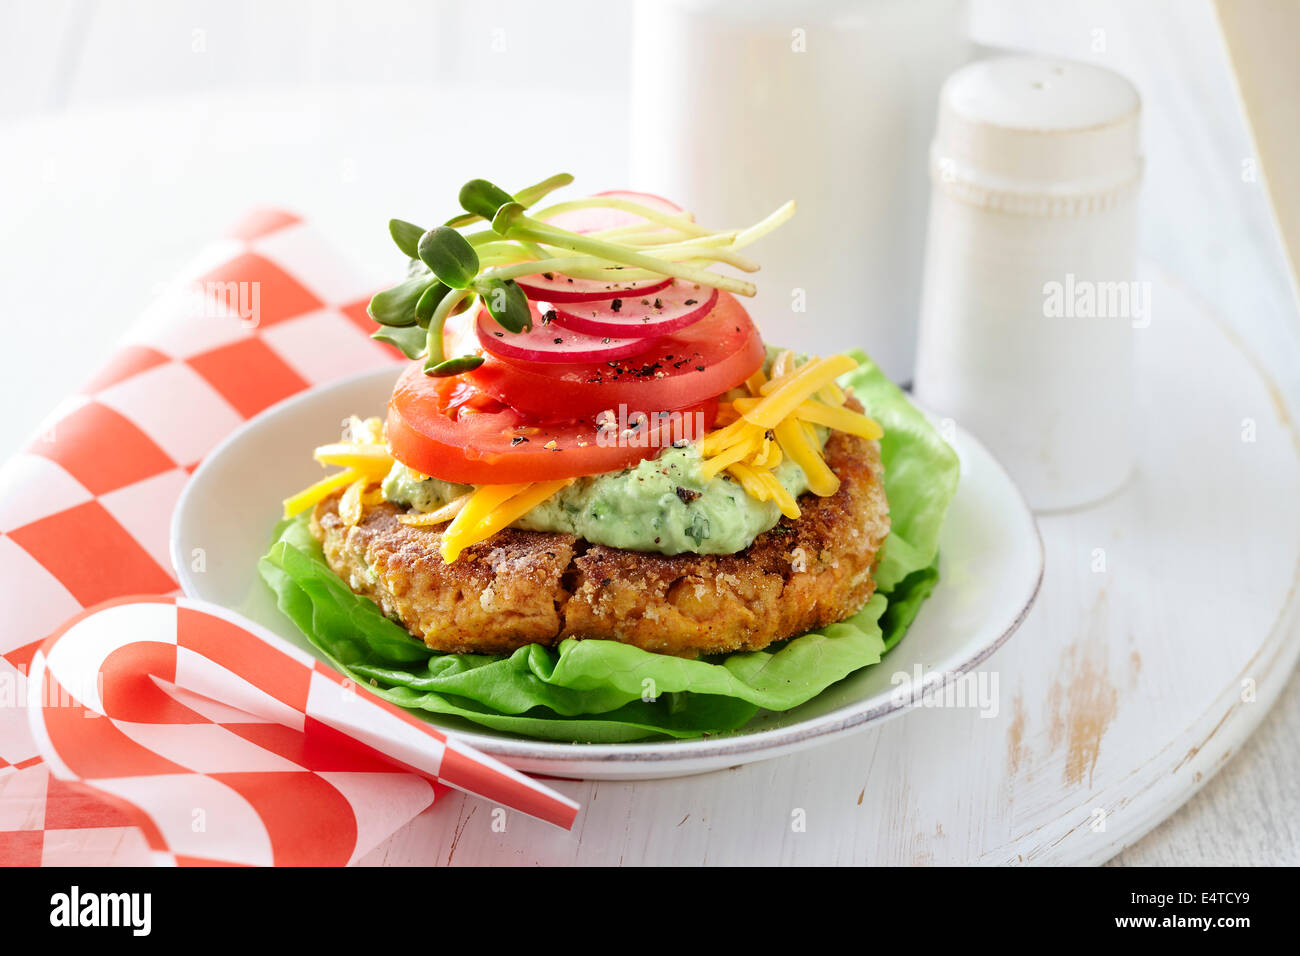 Gluten free chickpea burger with lettuce, guacamole, shredded cheddar cheese, tomatoes, red onion, and sprouts Stock Photo